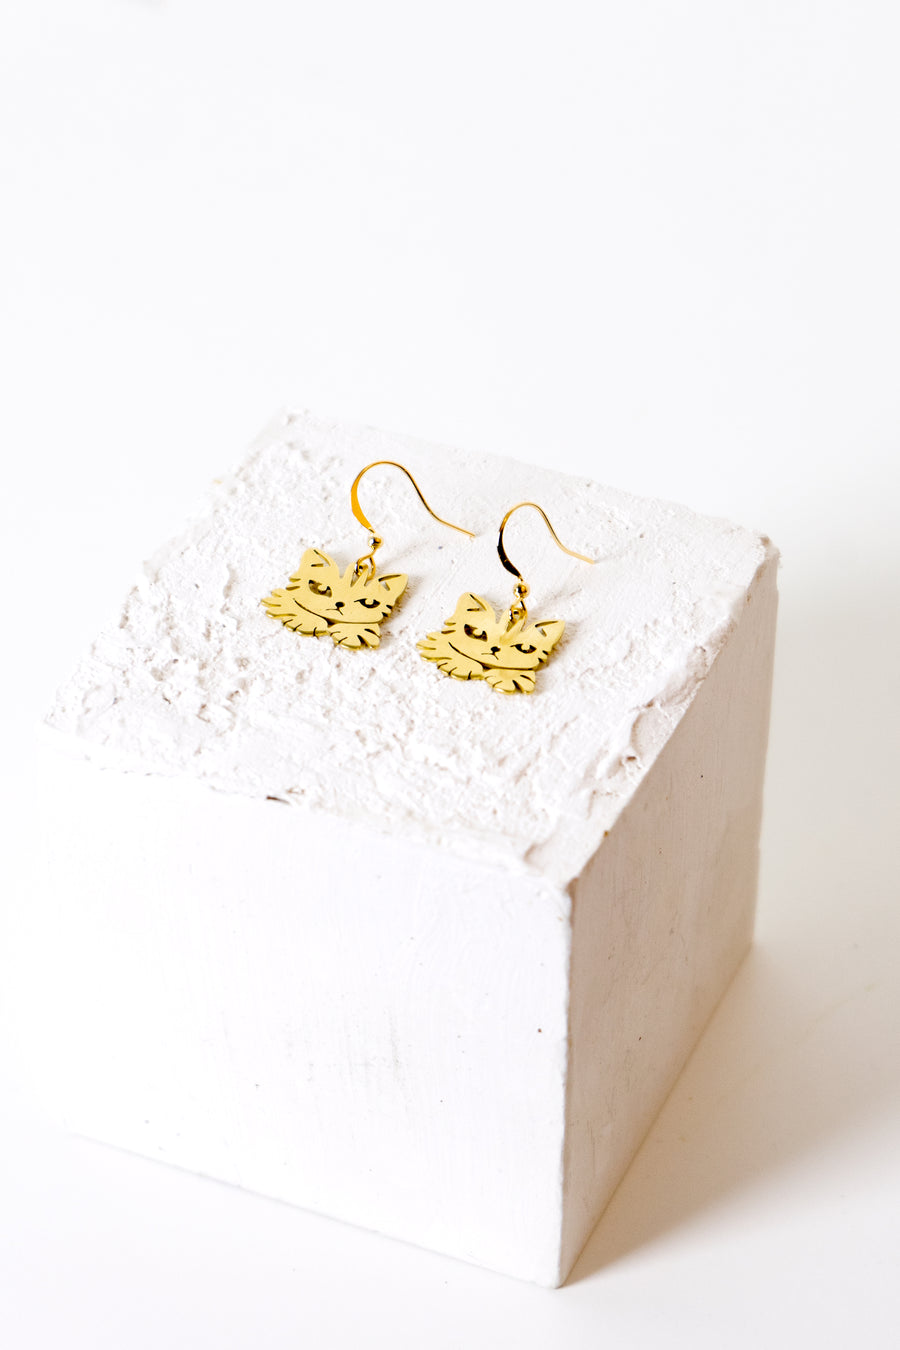 Thinking About Cats Again Earring